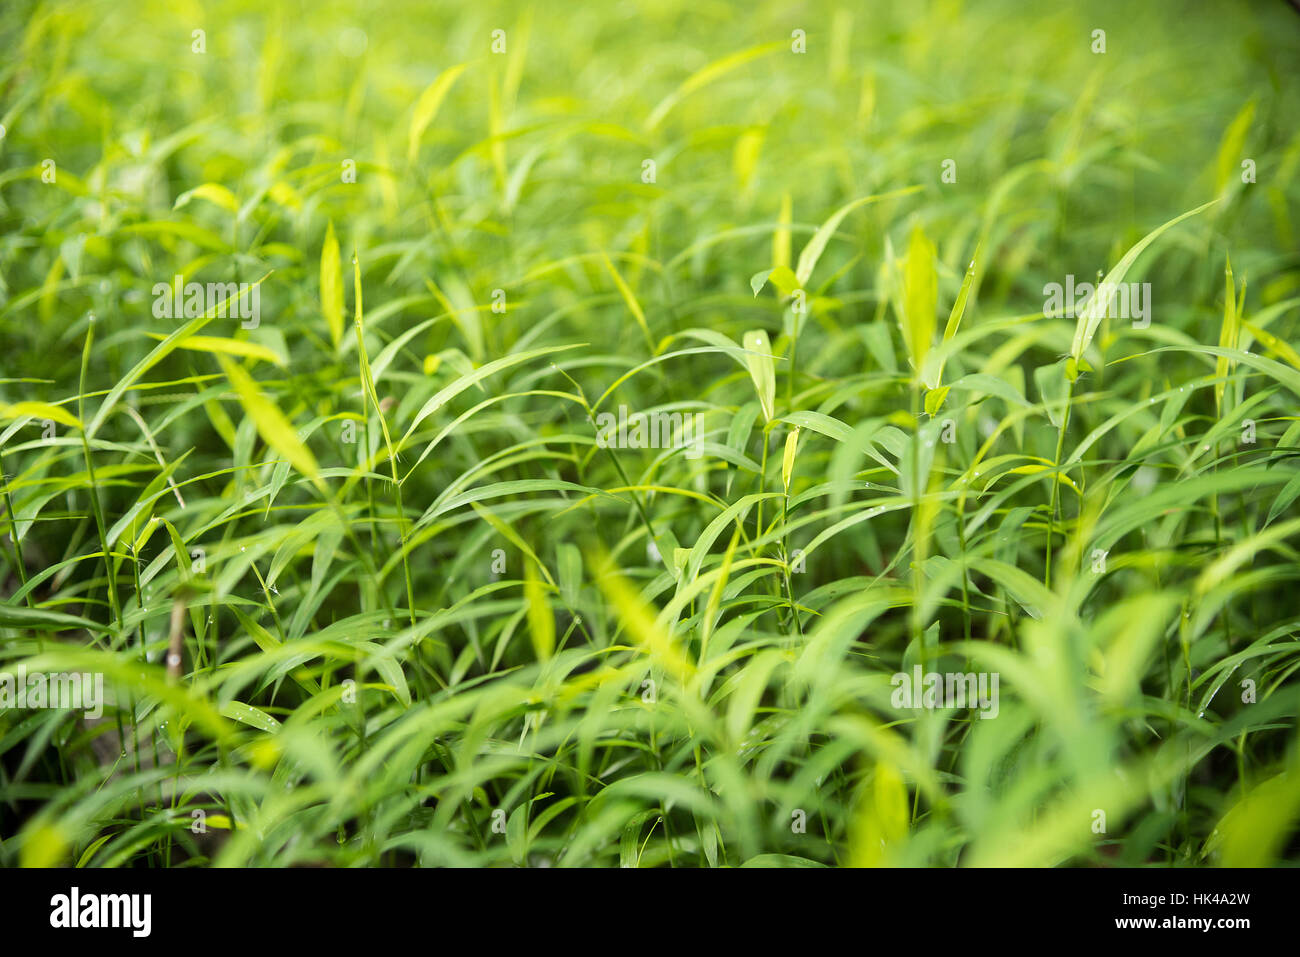 Green para grass leaves fresh nature background Stock Photo